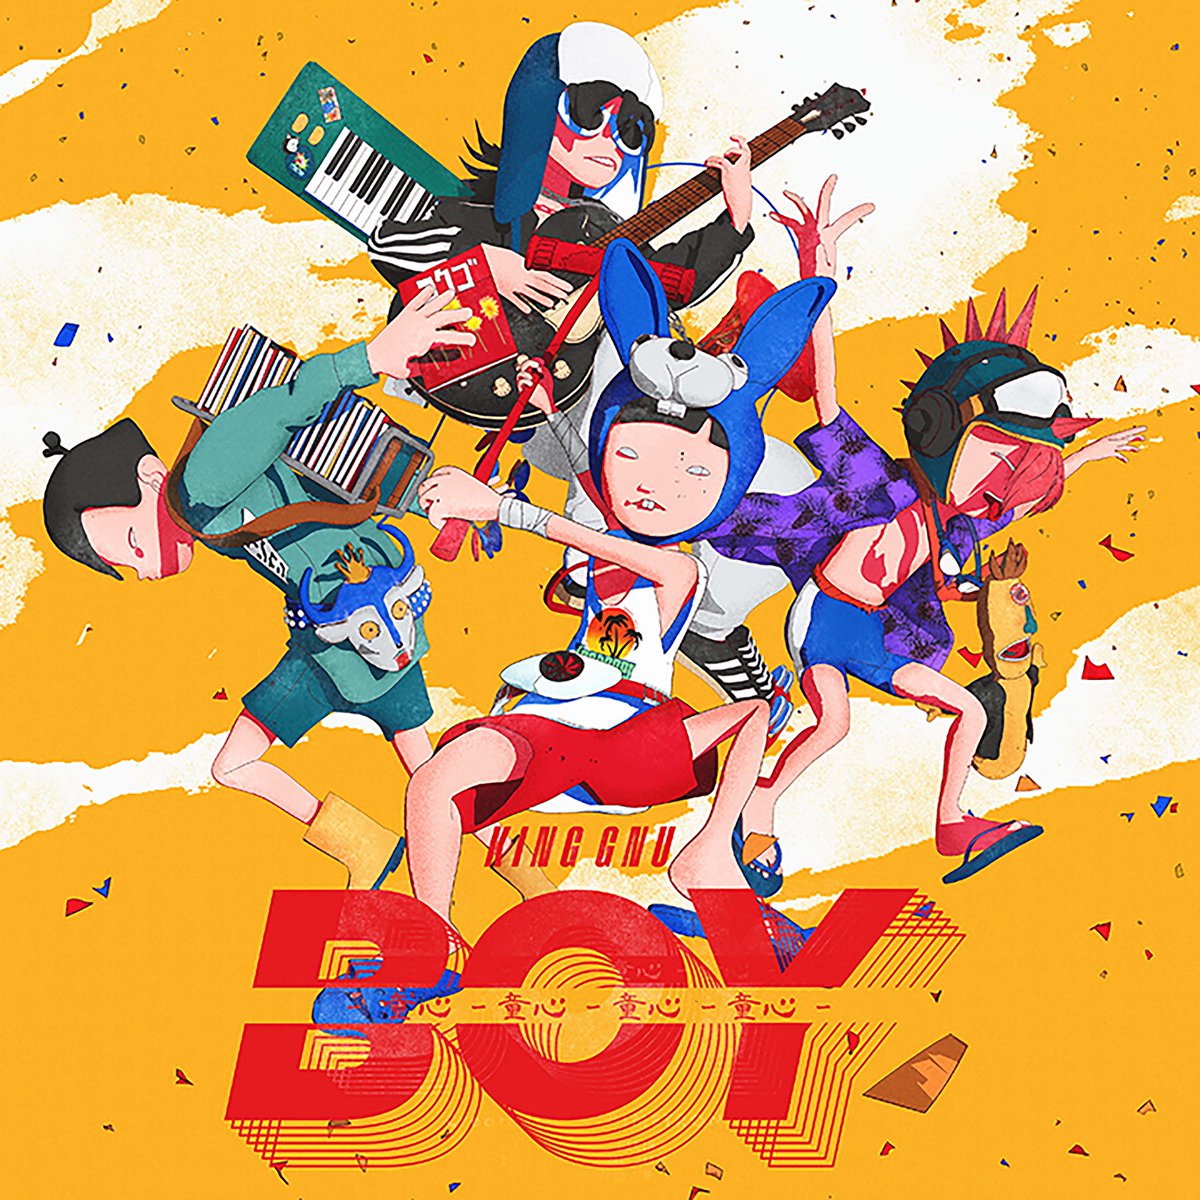 Cover for『King Gnu - F.O.O.L』from the release『BOY』